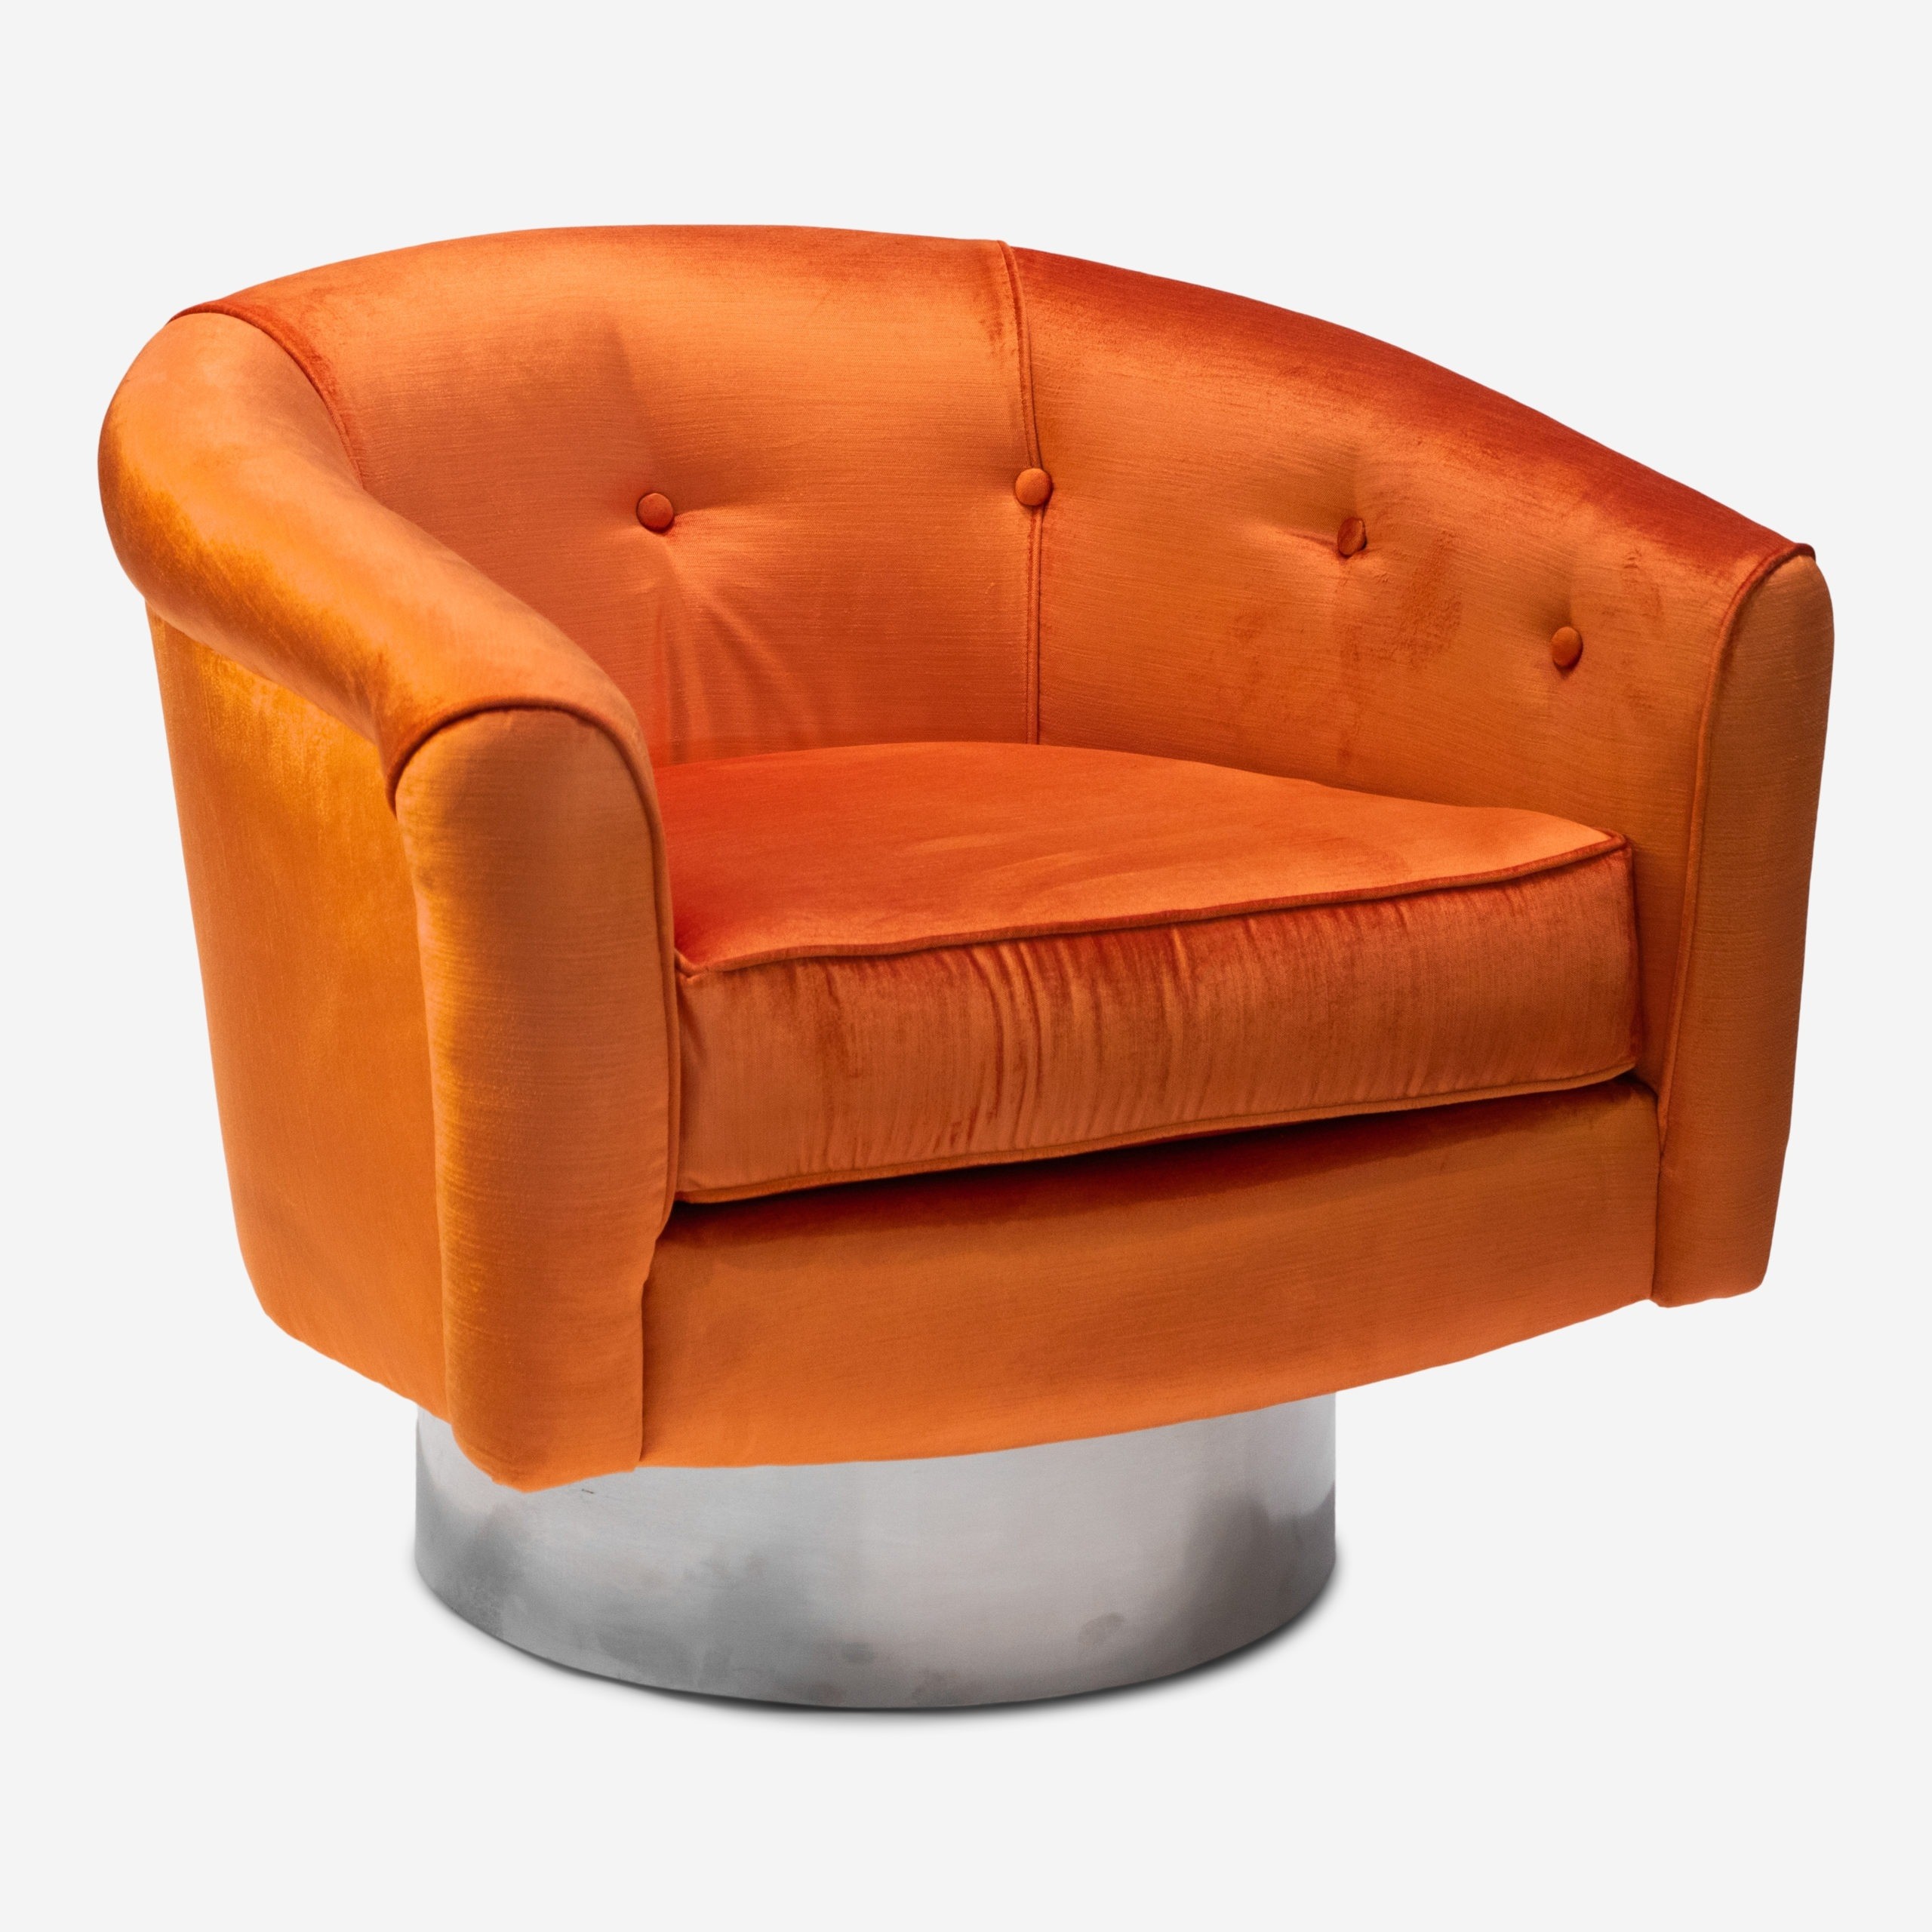 Pair of orange and chrome swivel chairs the silver fund